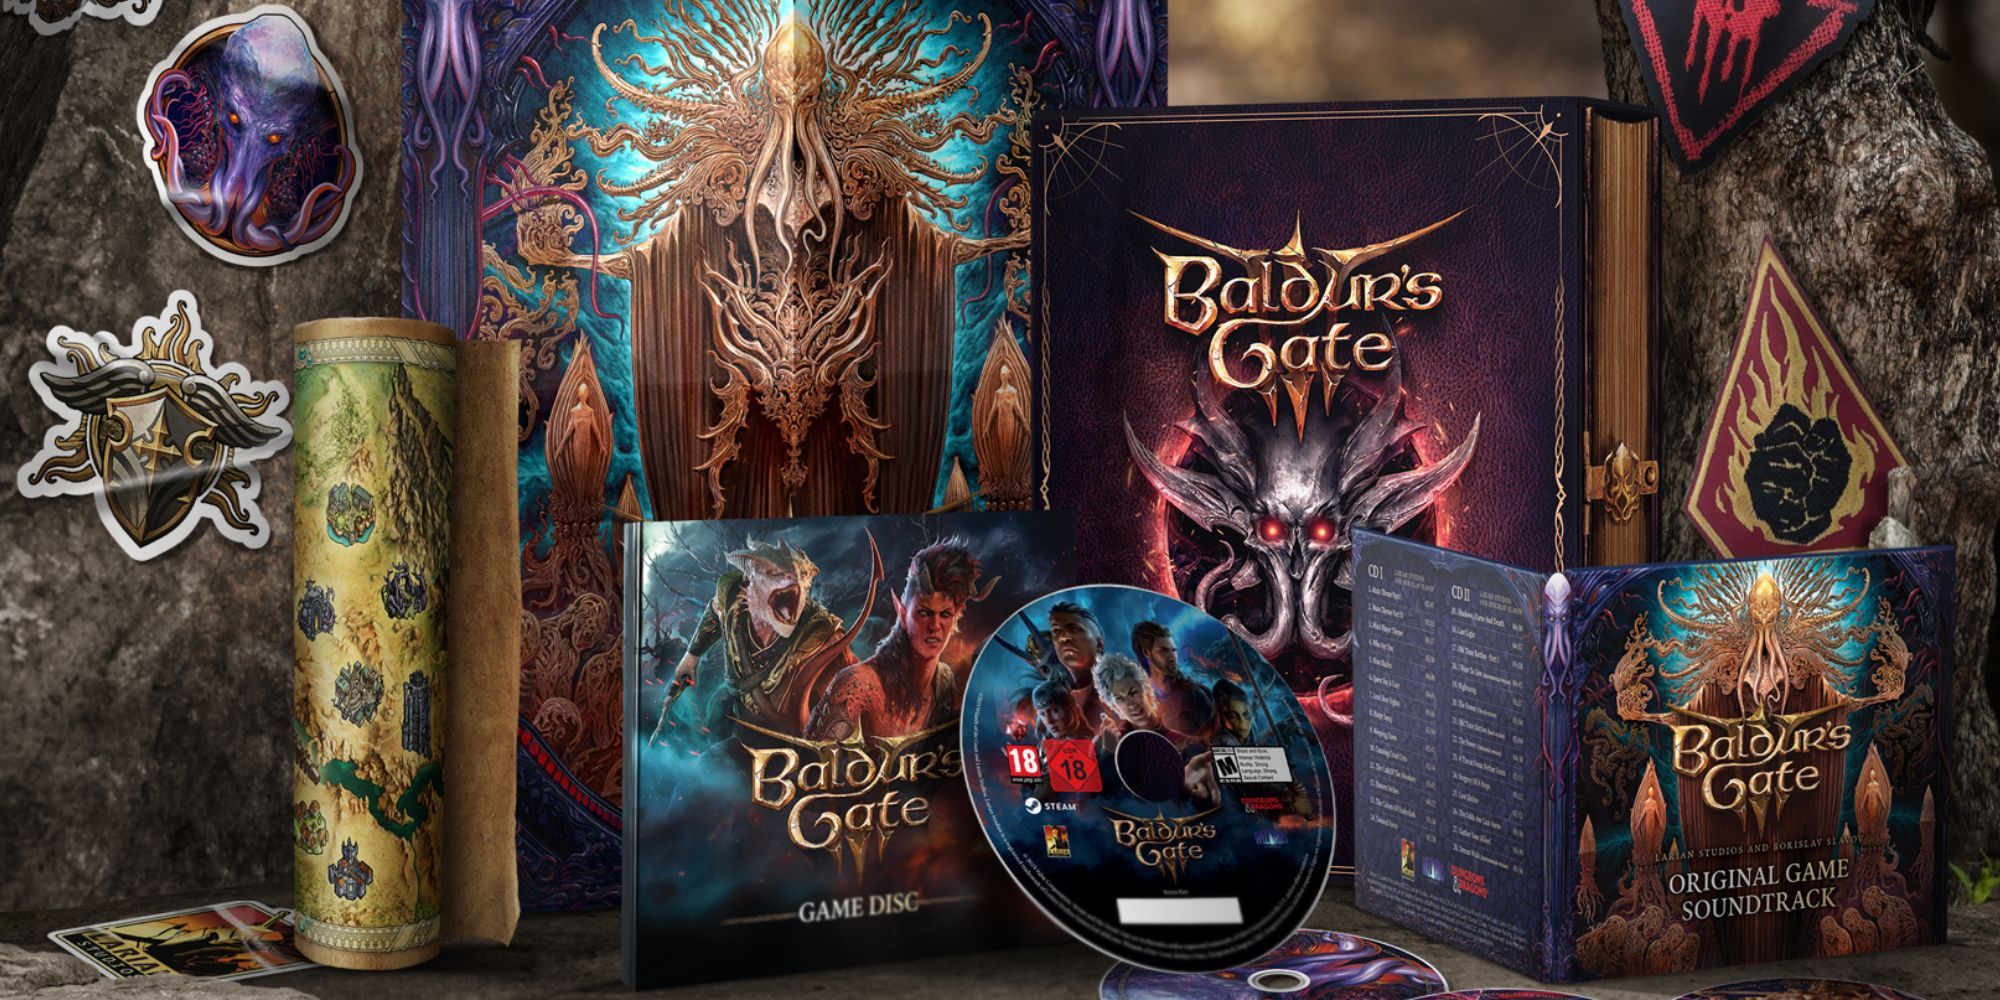 The Deluxe Edition of Baldur's Gate 3